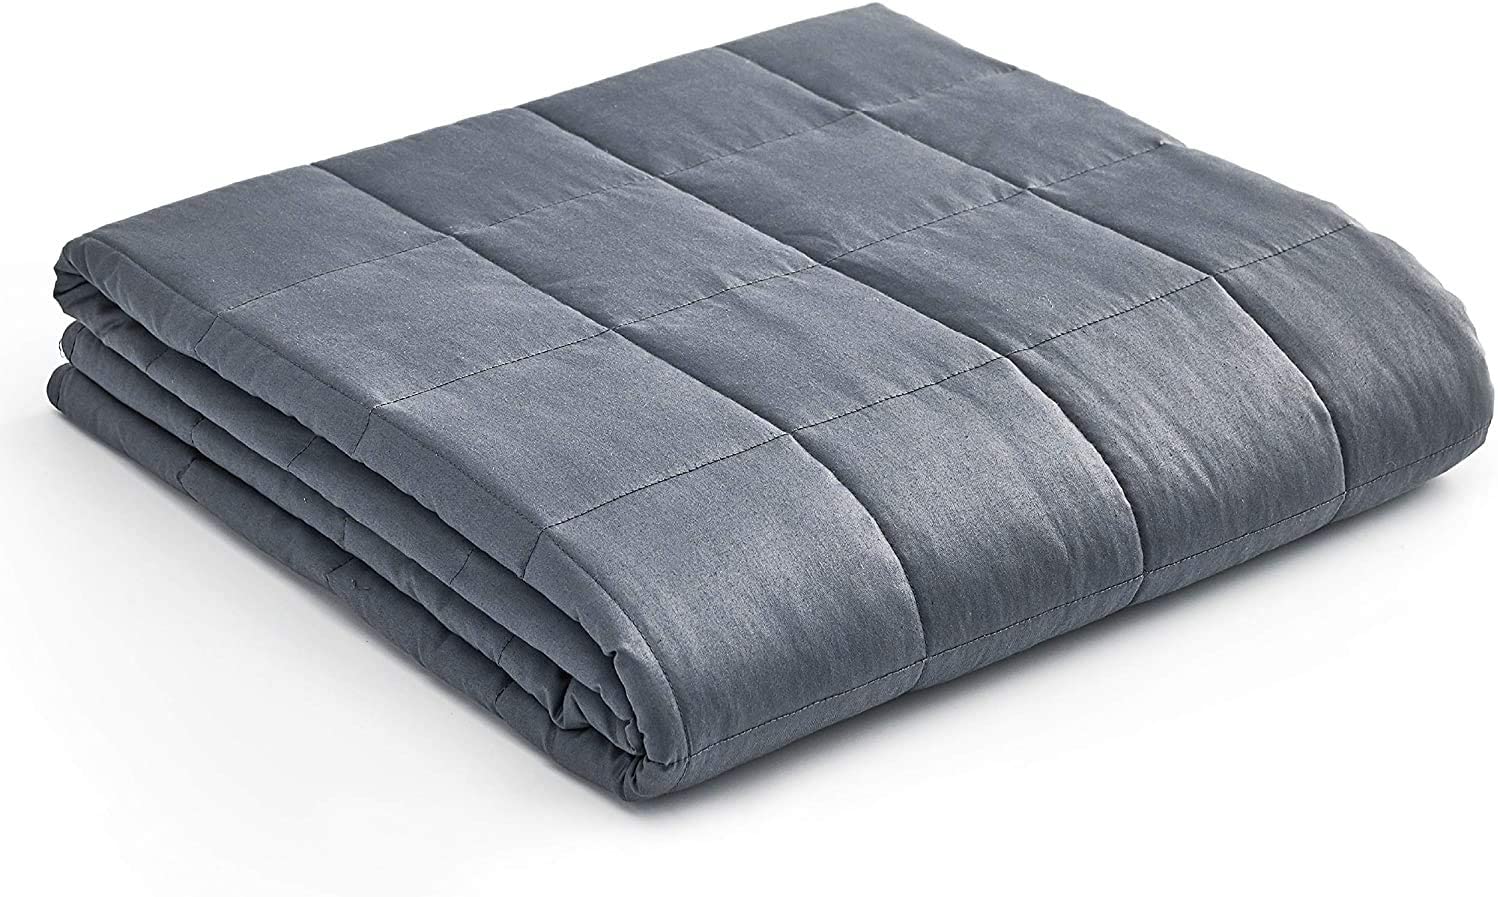 The Best Weighted Blanket | April 2022